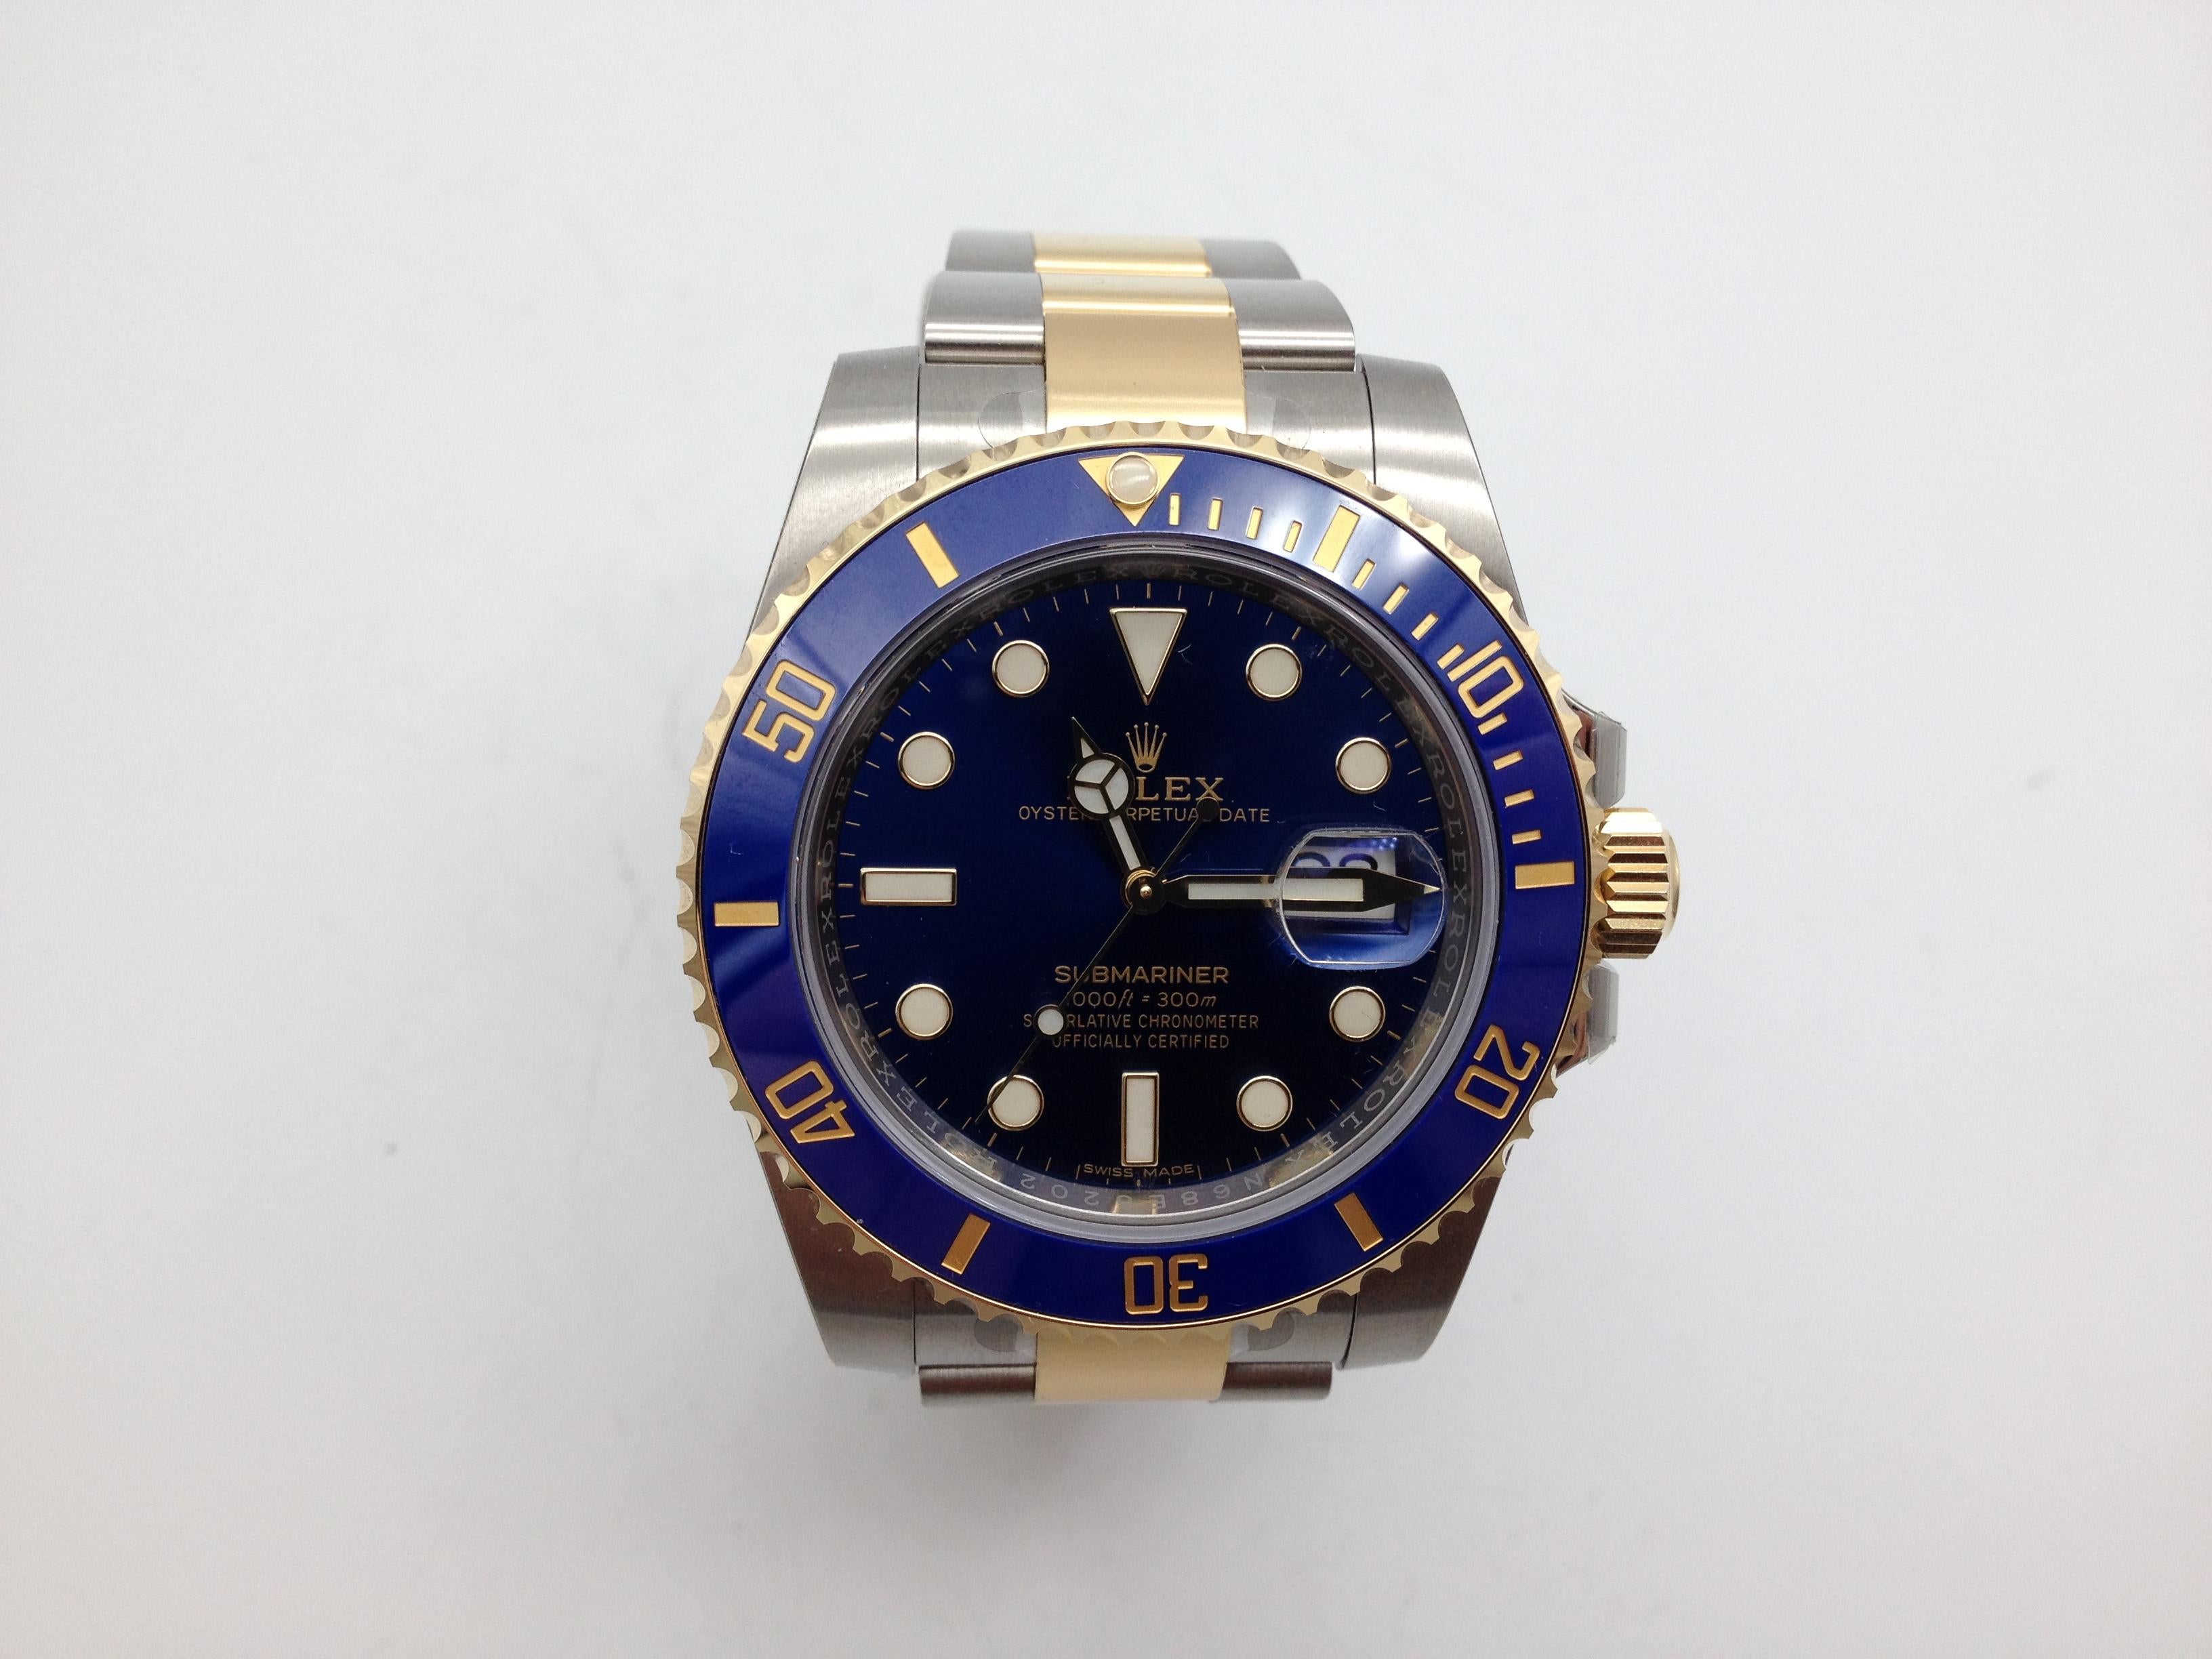 New, never worn, in plastic Rolex Submariner men's wrist watch stainless steel and gold, 40 mm., reference 116613. With Box And Papers. 5 years international warranty.